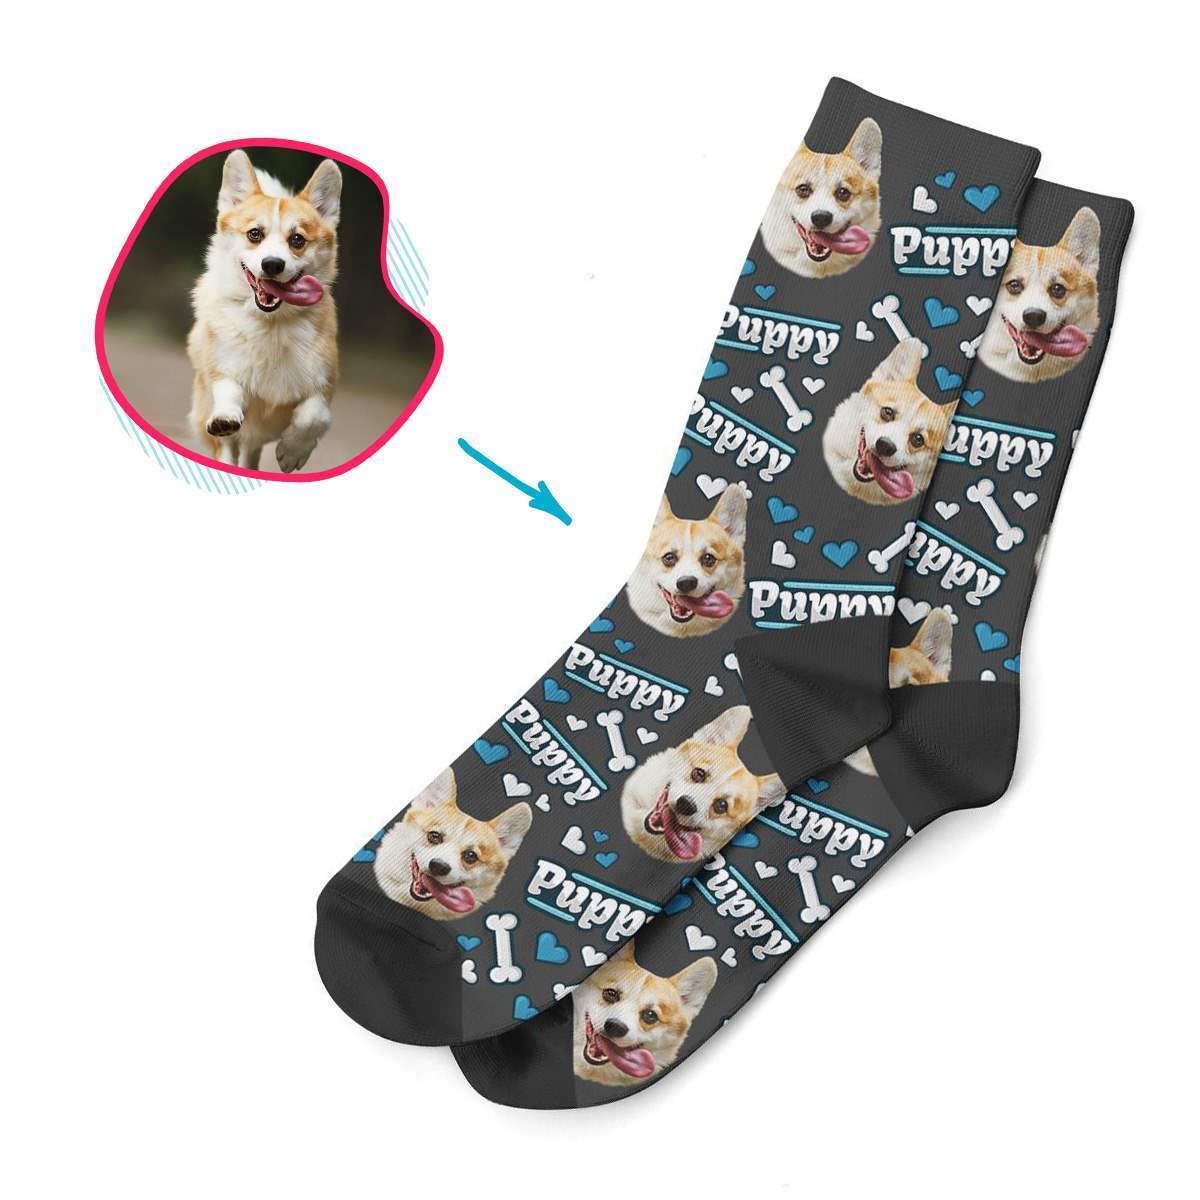 dark Puppy socks personalized with photo of face printed on them